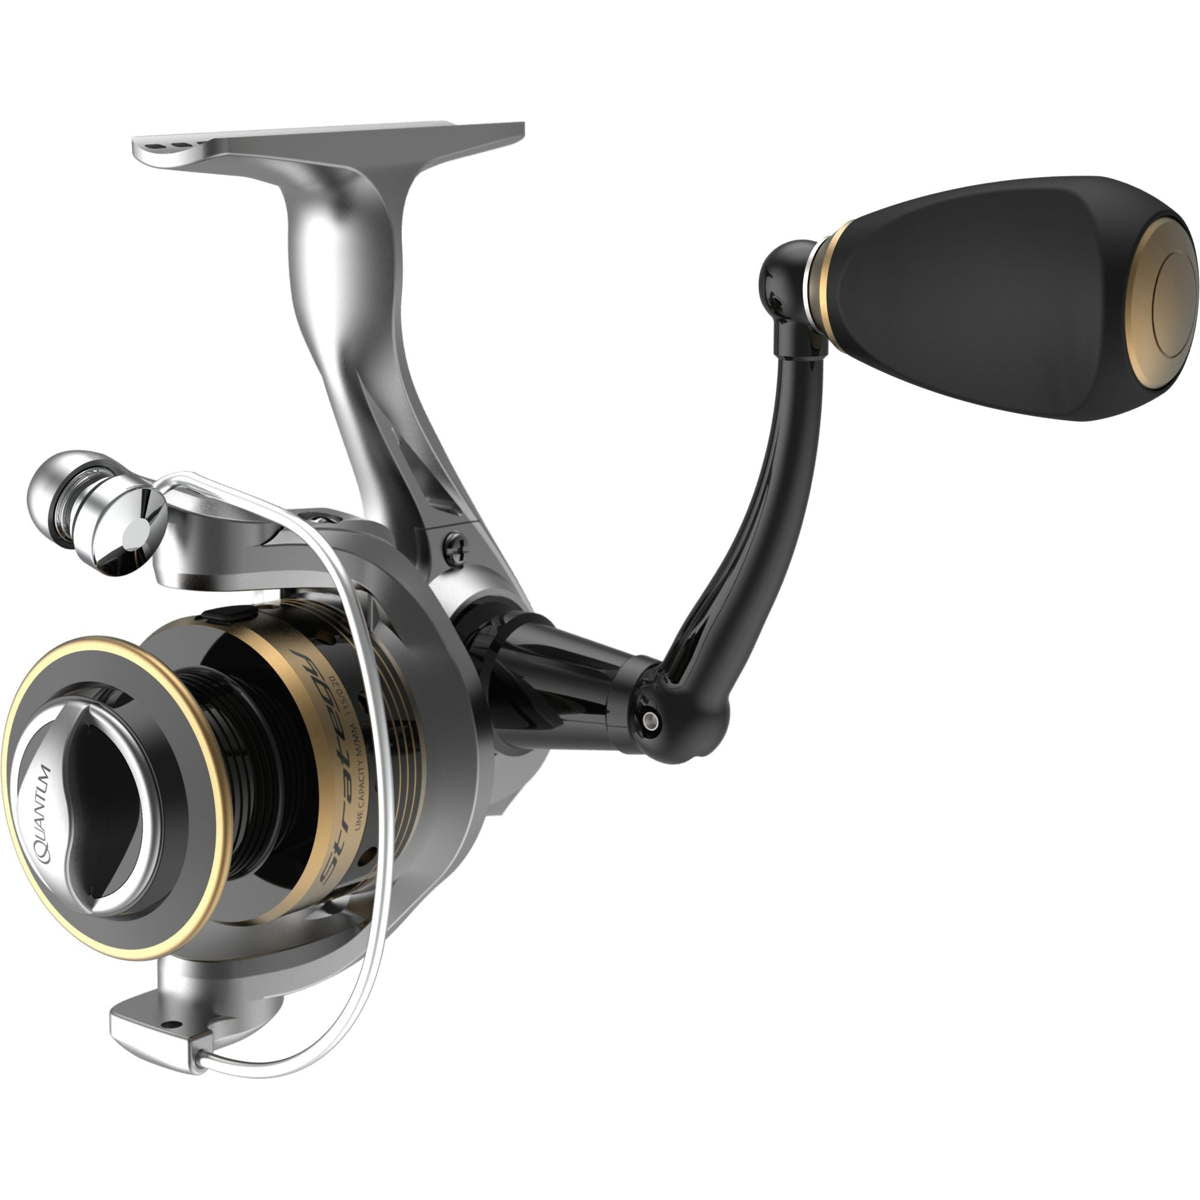 Photo of Quantum Strategy Spinning Reel for sale at United Tackle Shops.